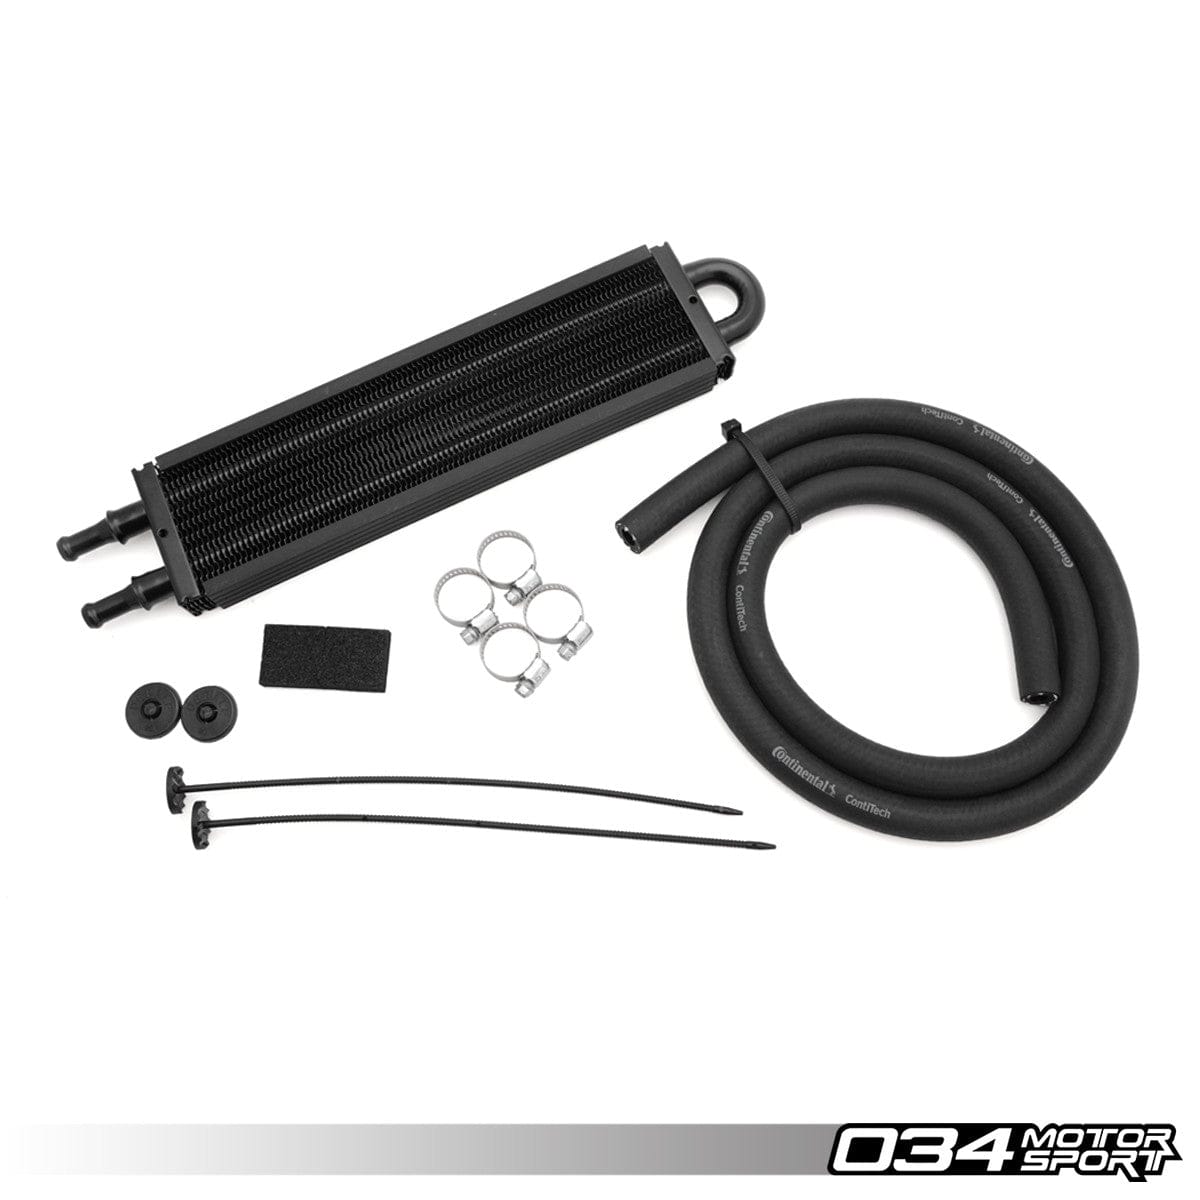 034Motorsport Compact Fluid Cooler With 5/16" Or 8mm Connections - ML Performance